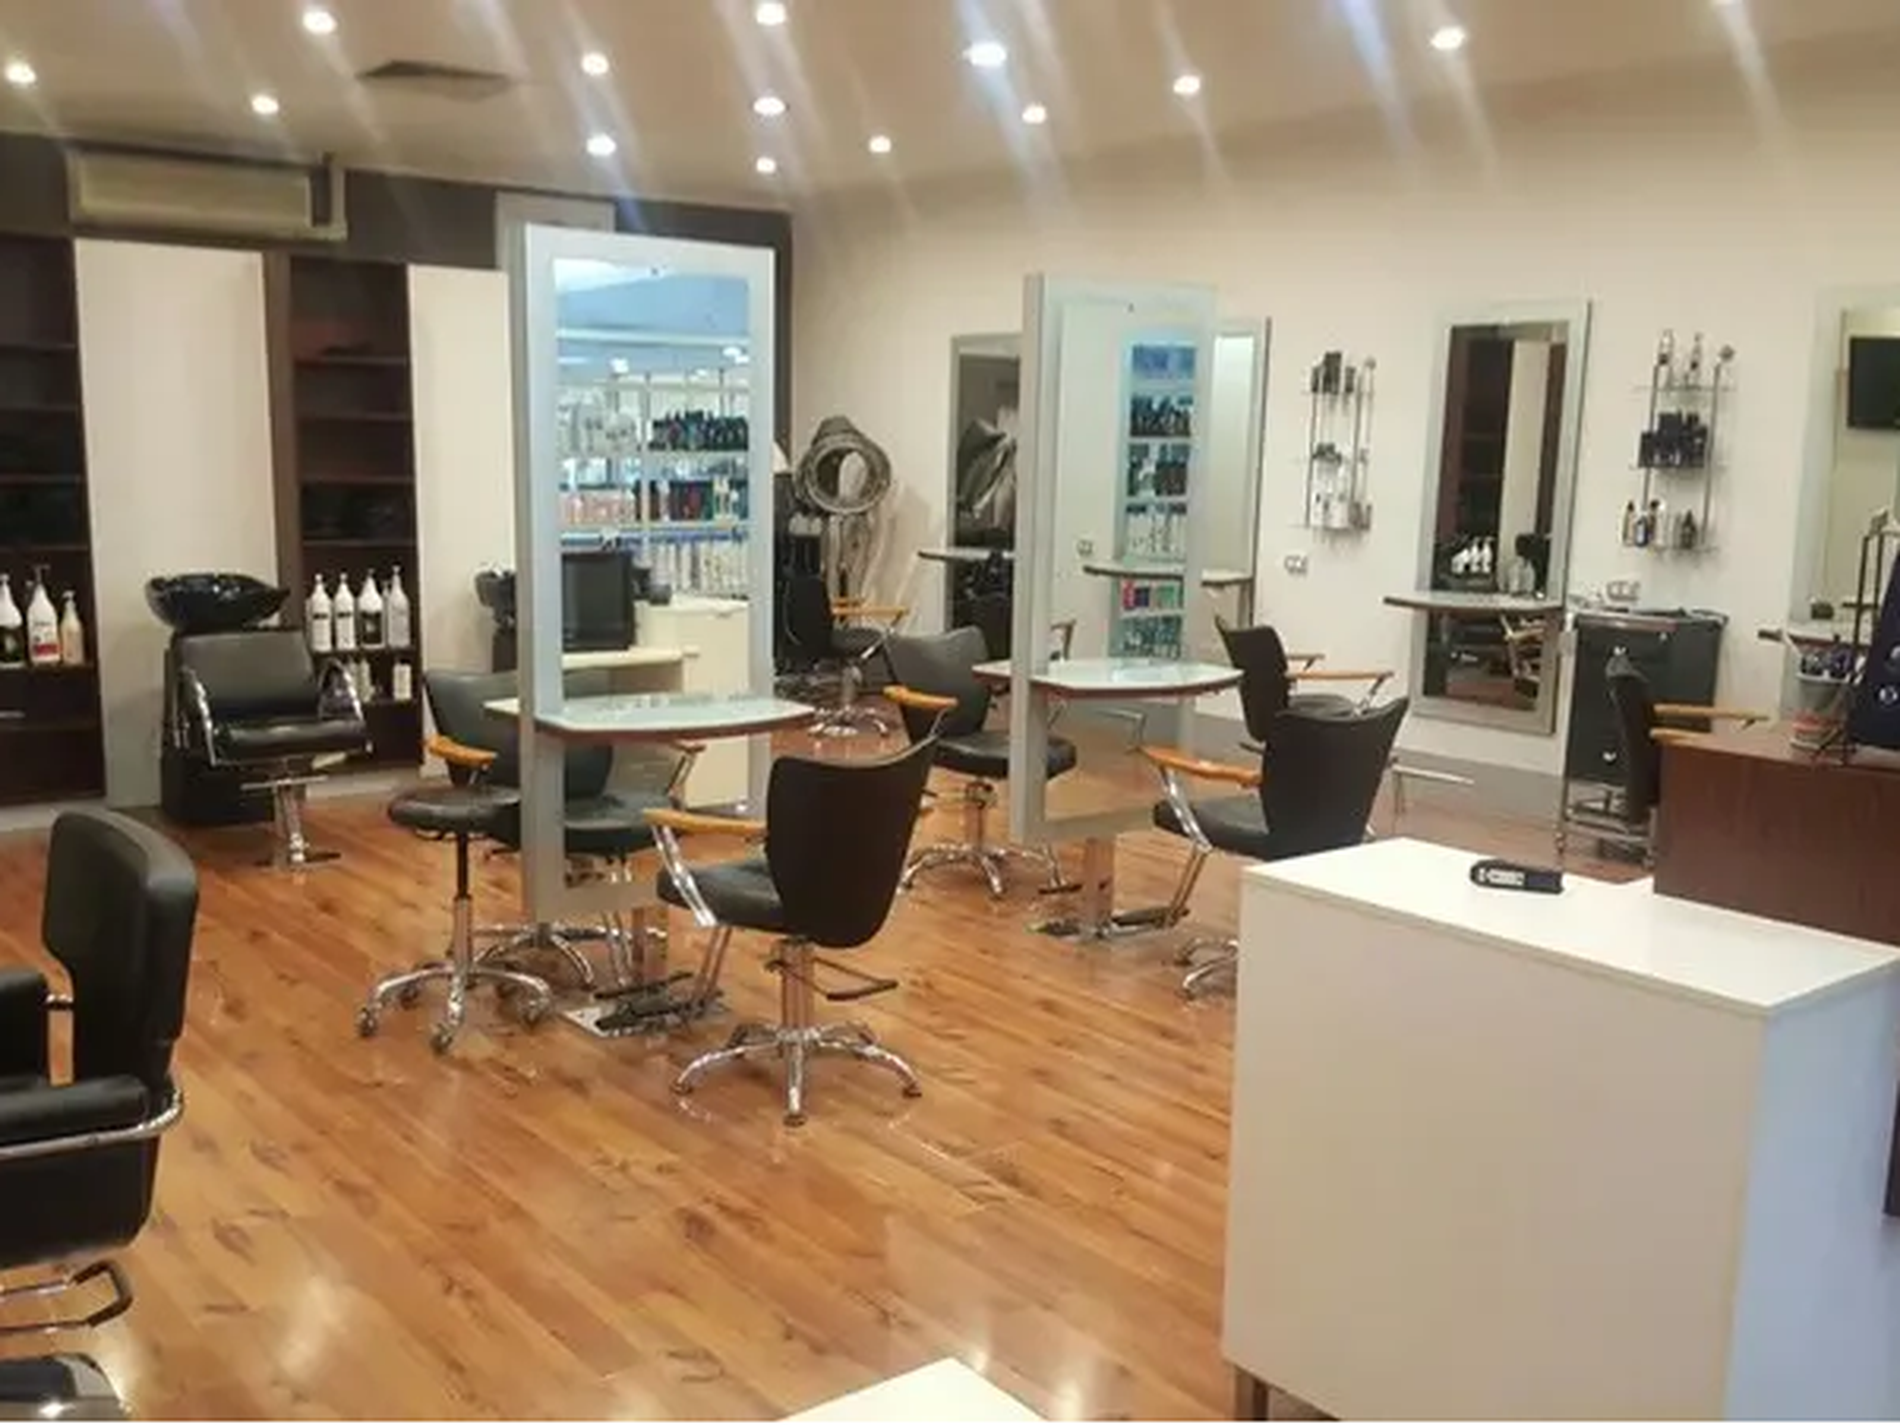 SOLD - Semi Managed Hair Salon Business for Sale in North East
